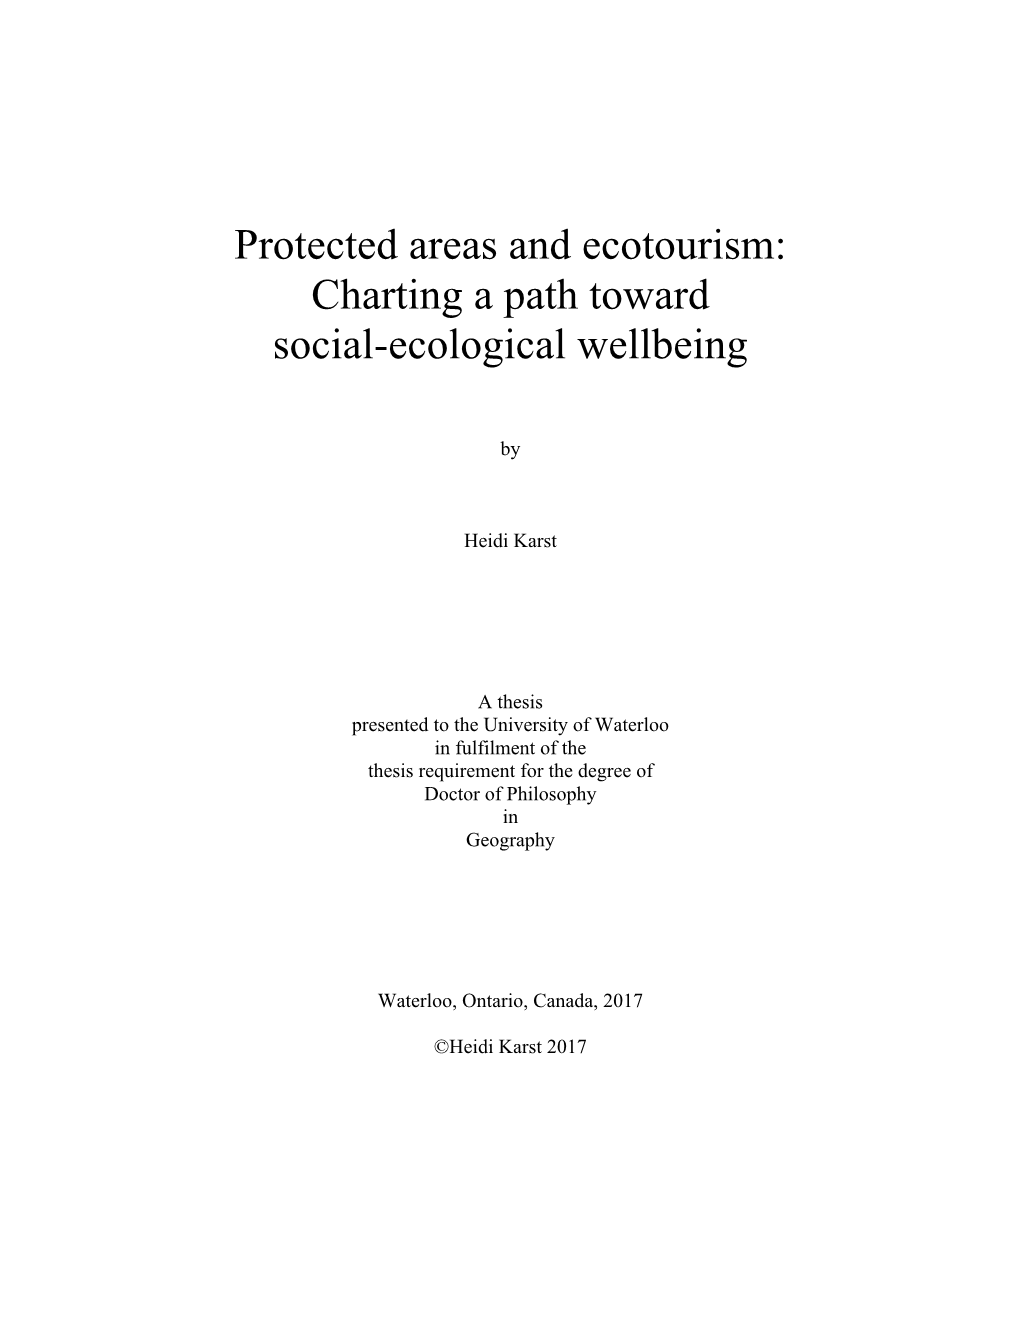 Protected Areas and Ecotourism: Charting a Path Toward Social-Ecological Wellbeing